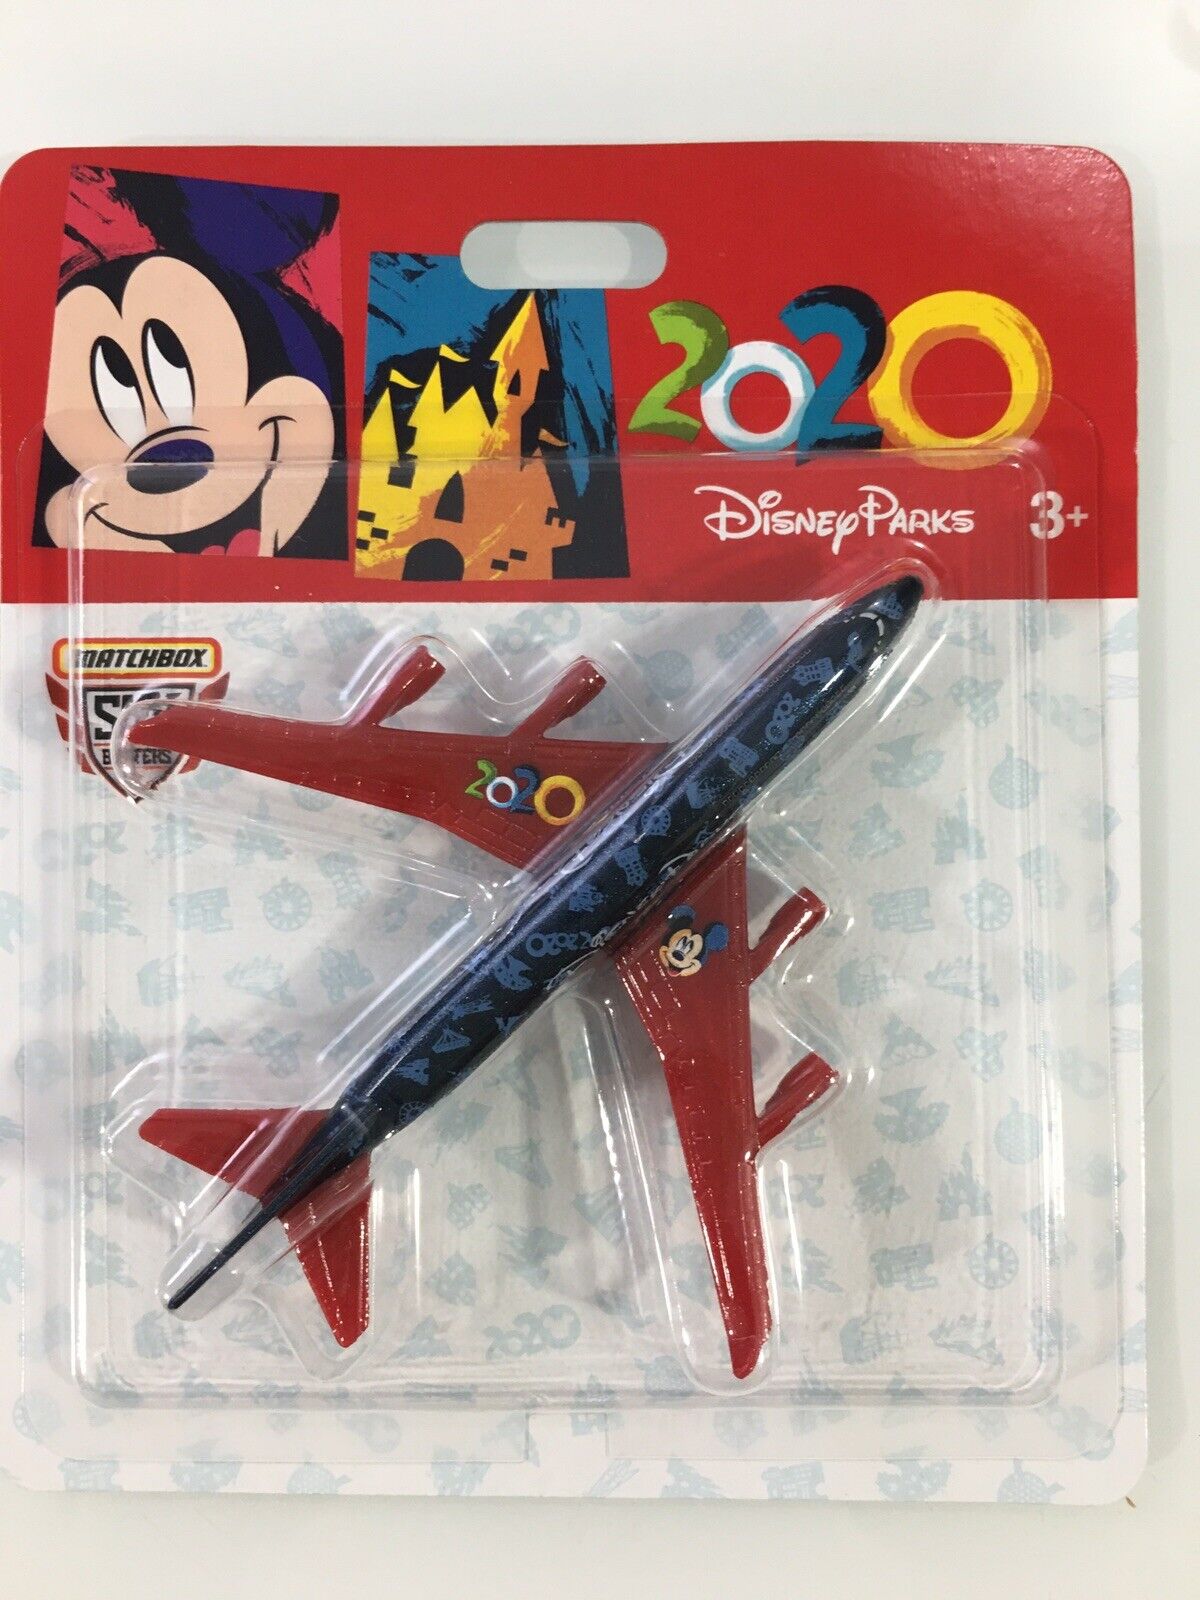 DISNEY PARKS MATCHBOX 2020 SKY BUSTERS AIRPLANE